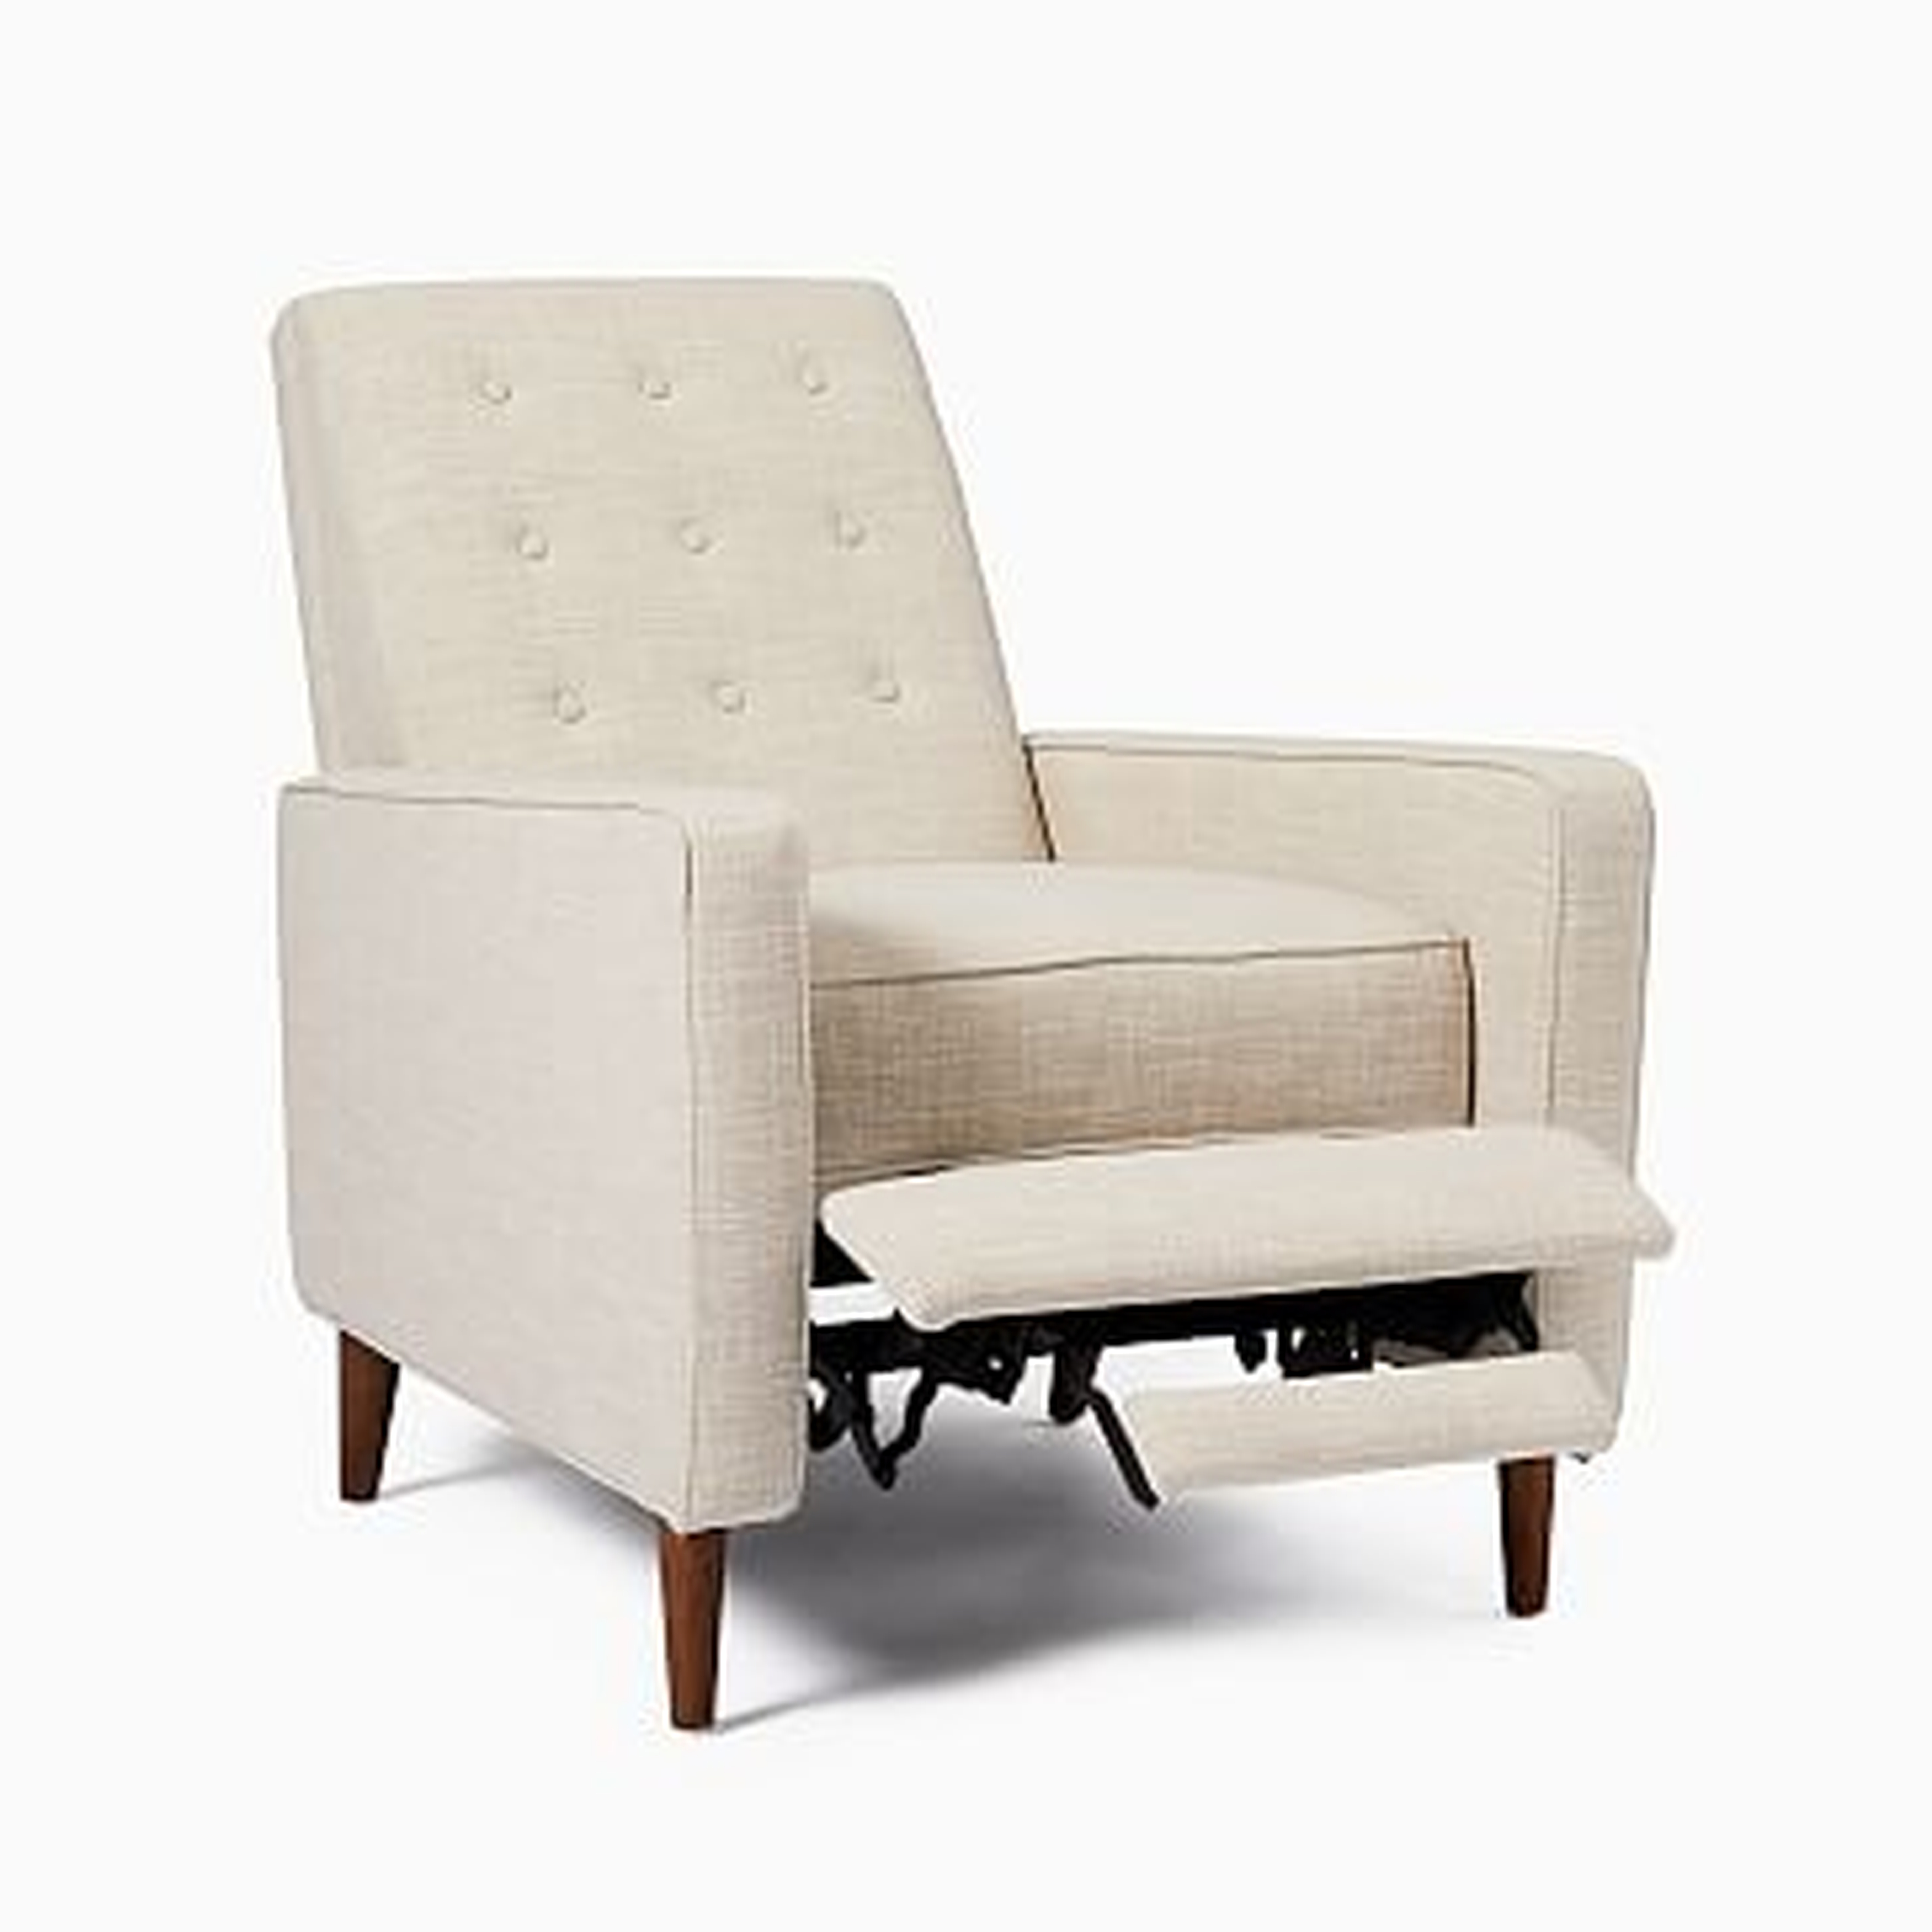 Rhys MidCentury Recliner, Poly, Yarn Dyed Linen Weave, Sand, Pecan - West Elm